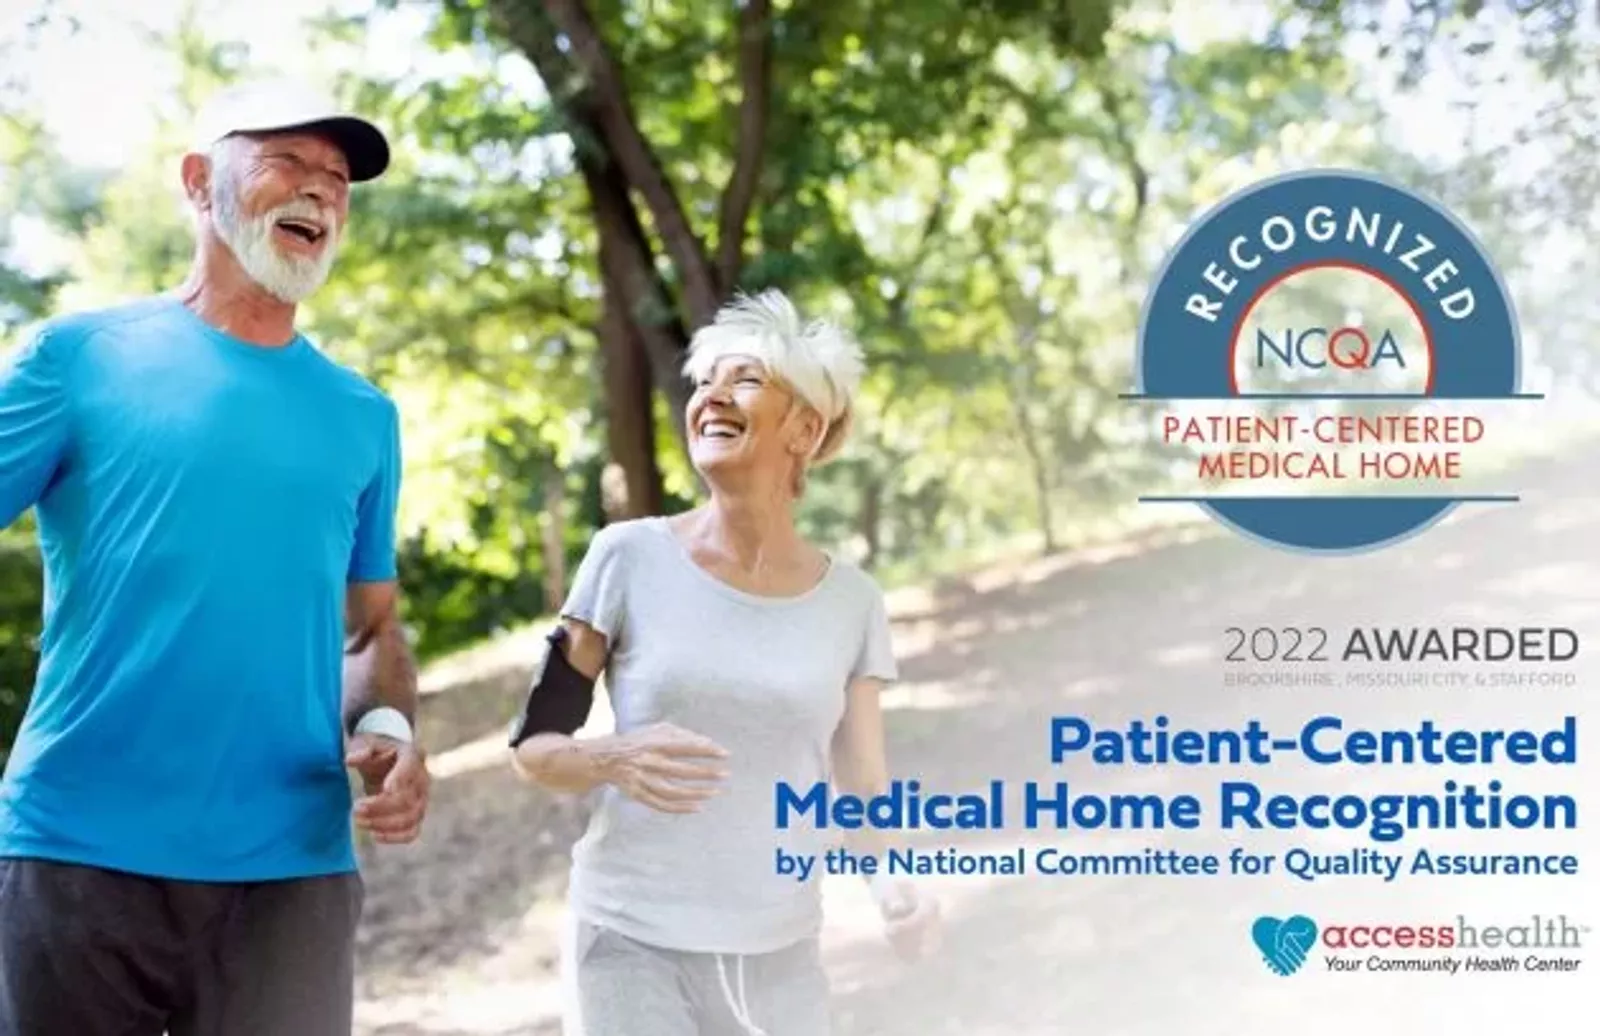 AccessHealth Brookshire, Missouri City, And Stafford Clinics Have Been Awarded The Patient-Centered Medical Home Recognition By The National Committee For Quality Assurance